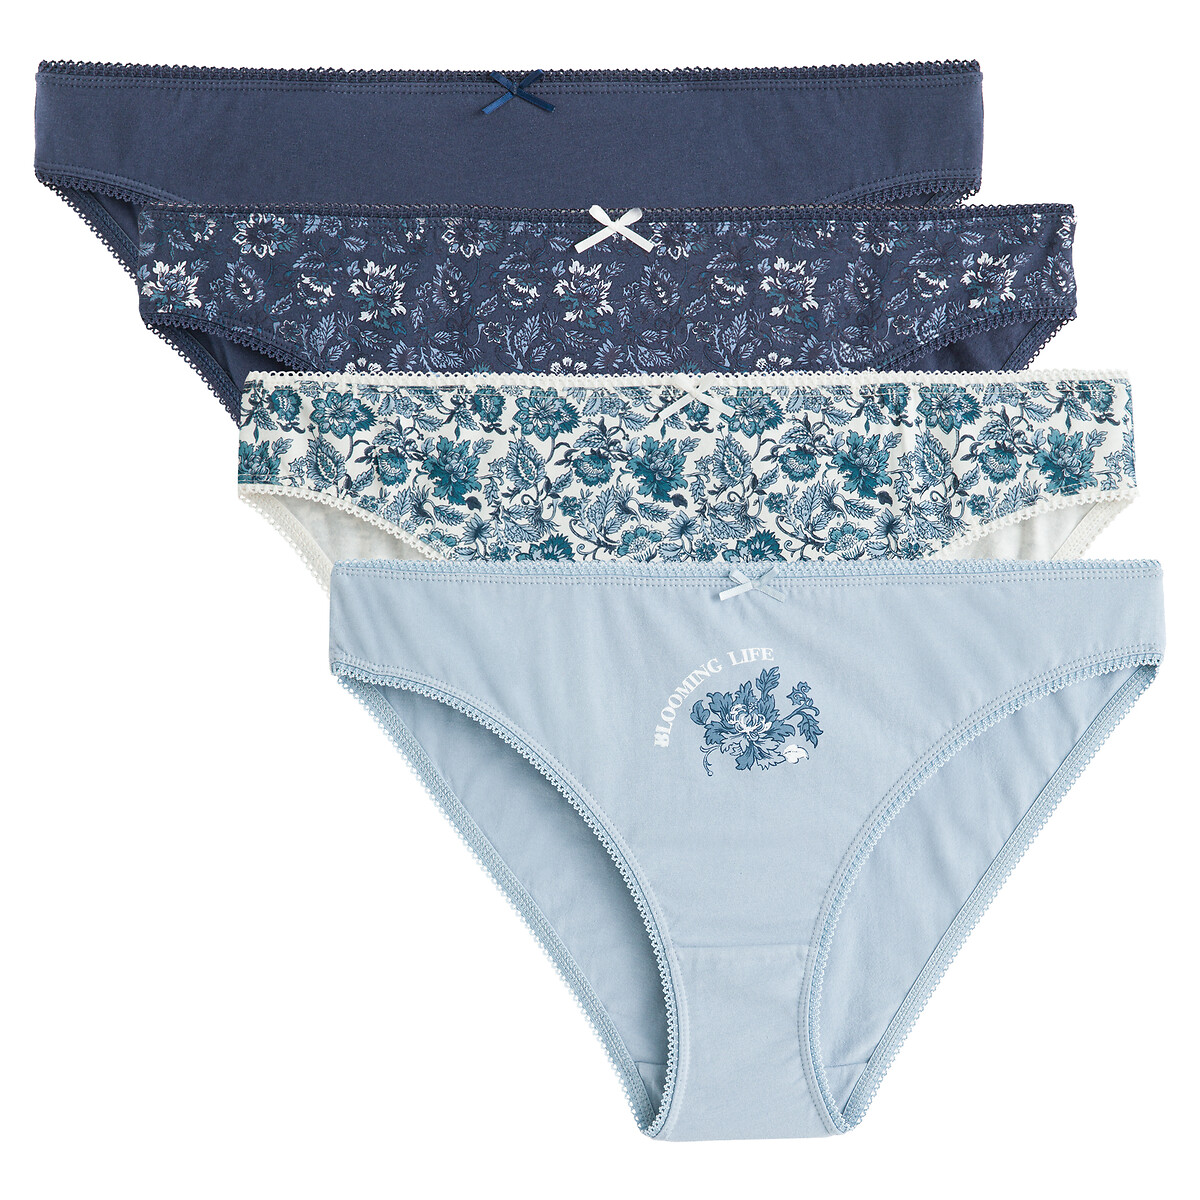 Pack of 3 printed knickers, printed, La Redoute Collections